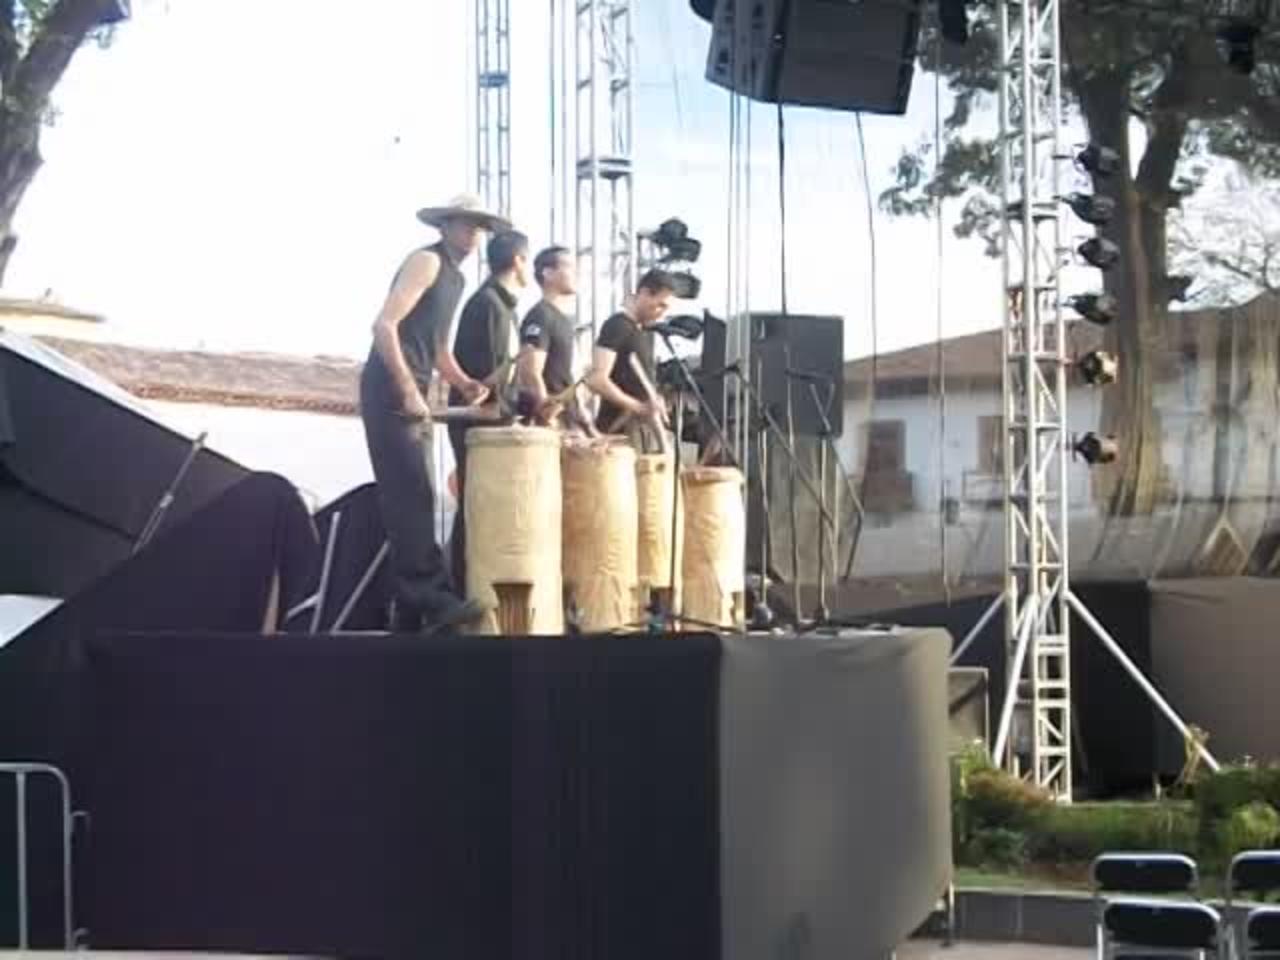 Mexican drummers